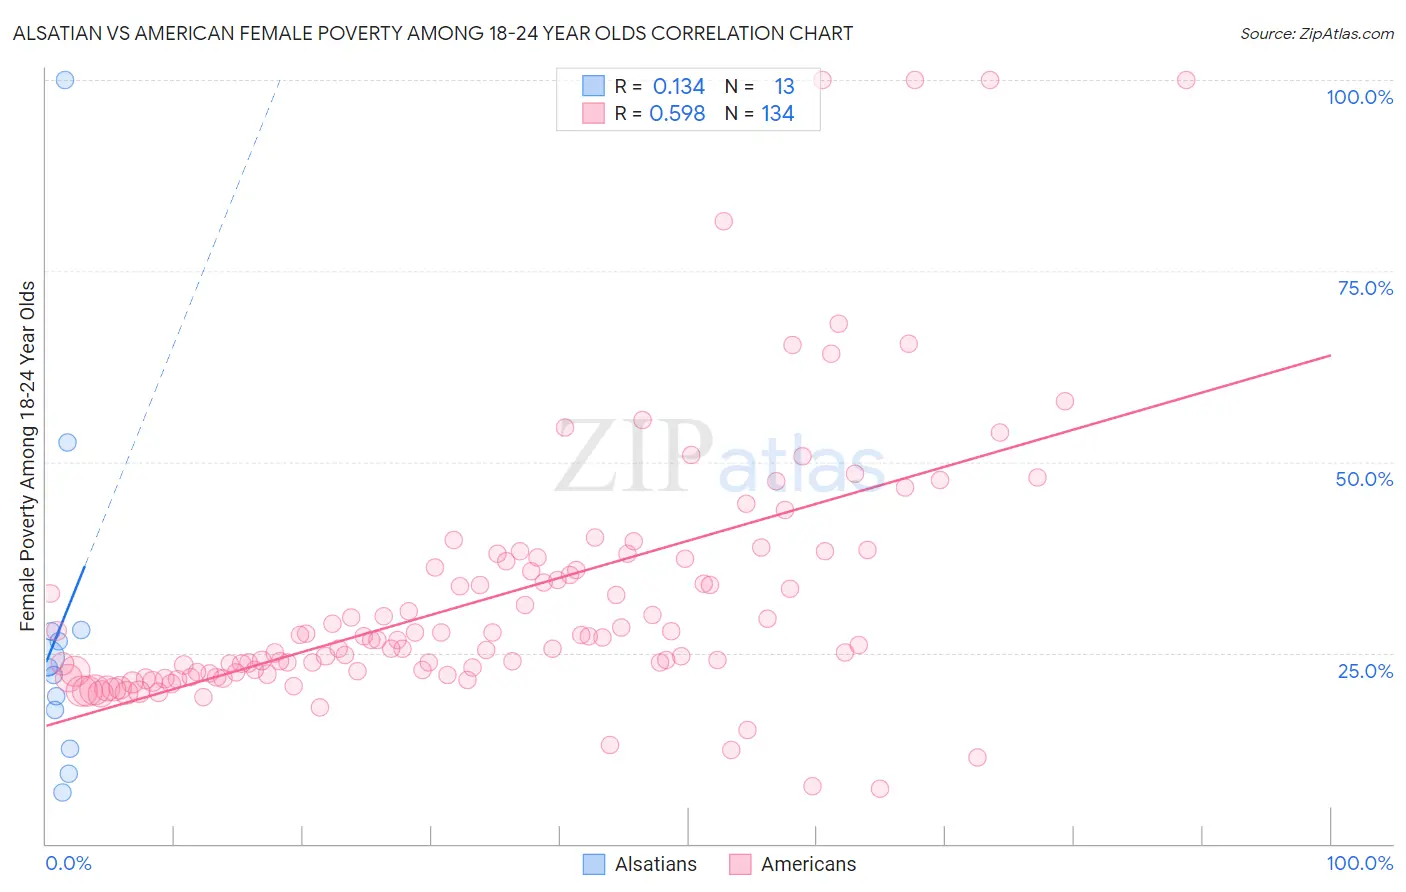 Alsatian vs American Female Poverty Among 18-24 Year Olds